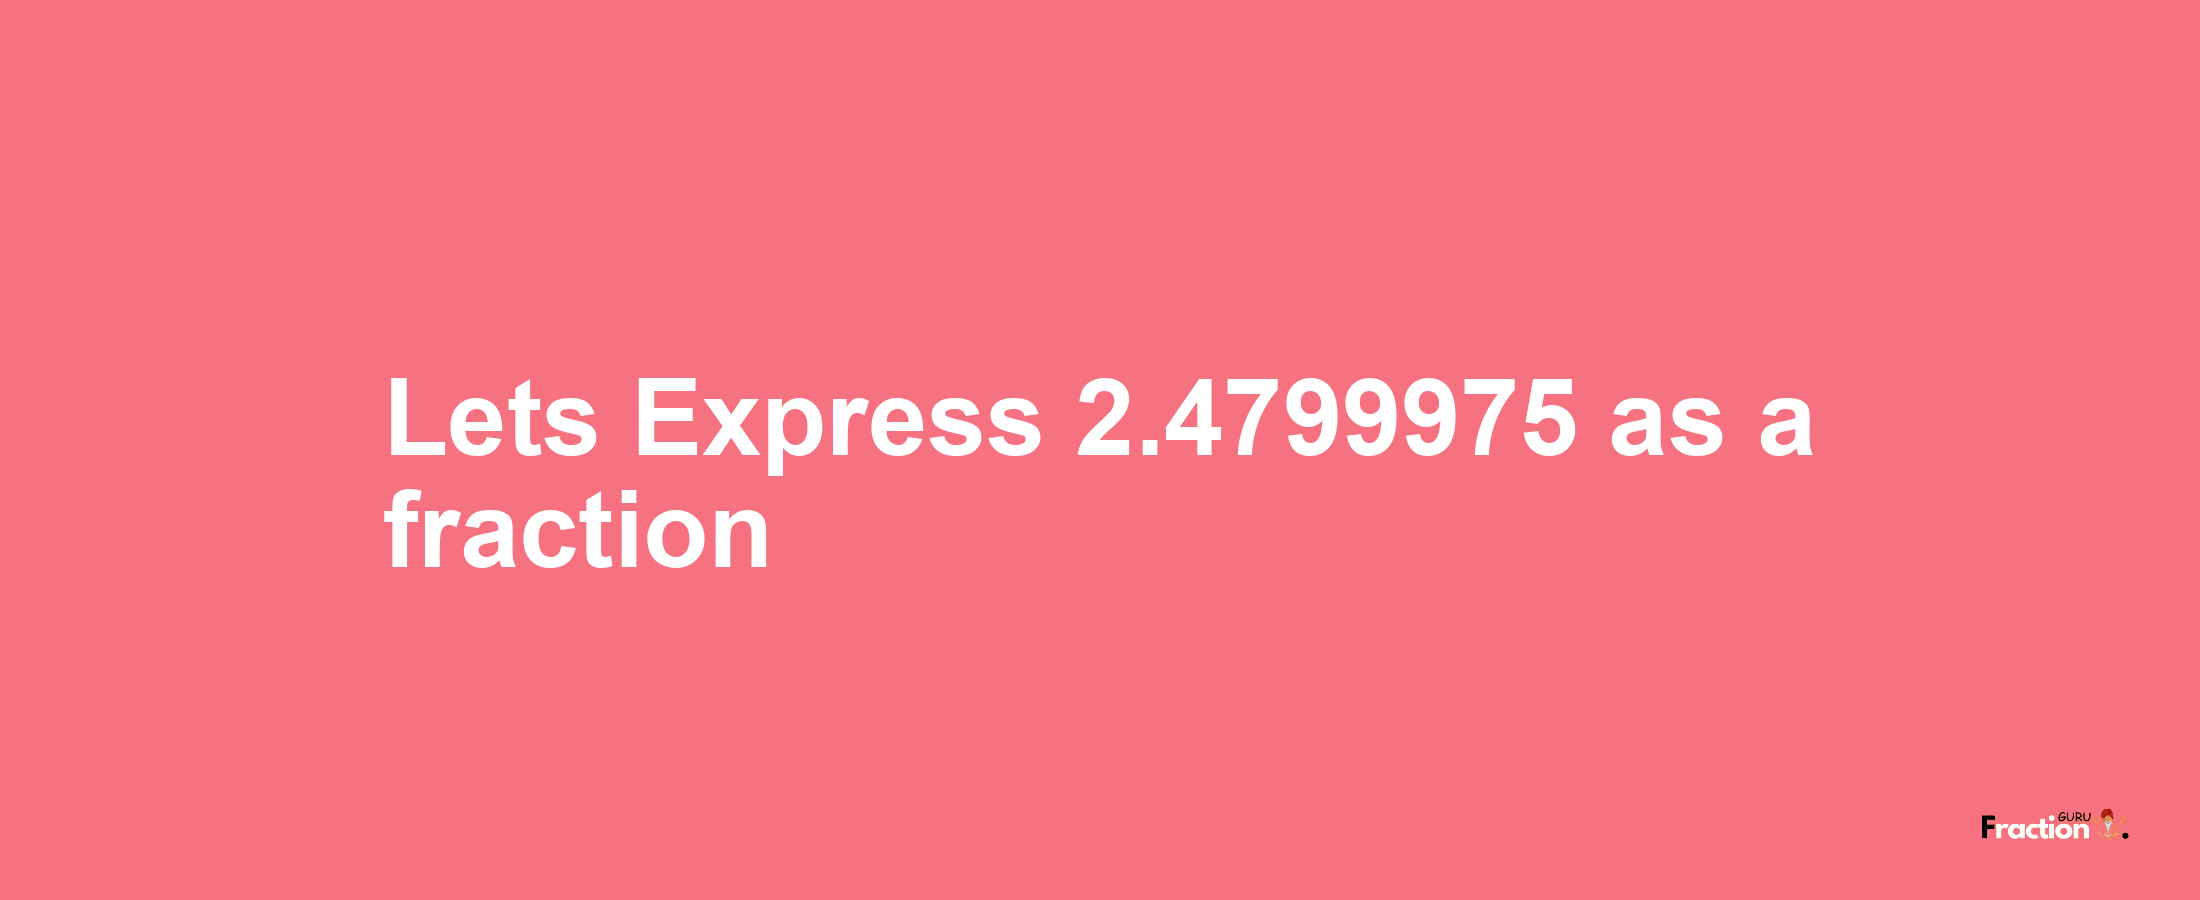 Lets Express 2.4799975 as afraction